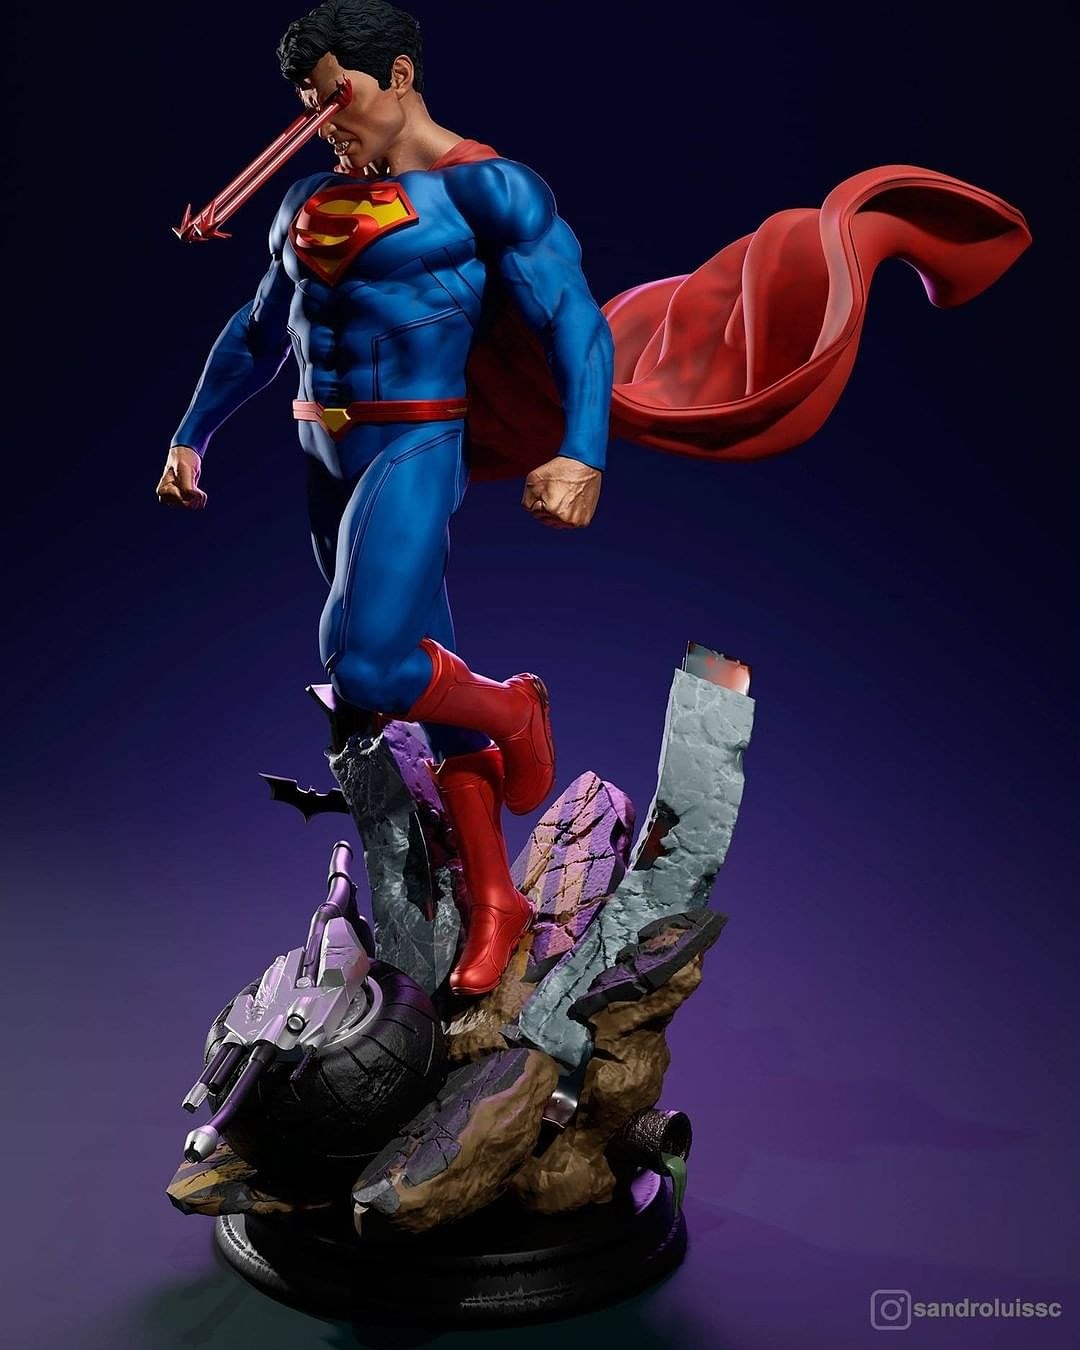 Superman V2 from DC